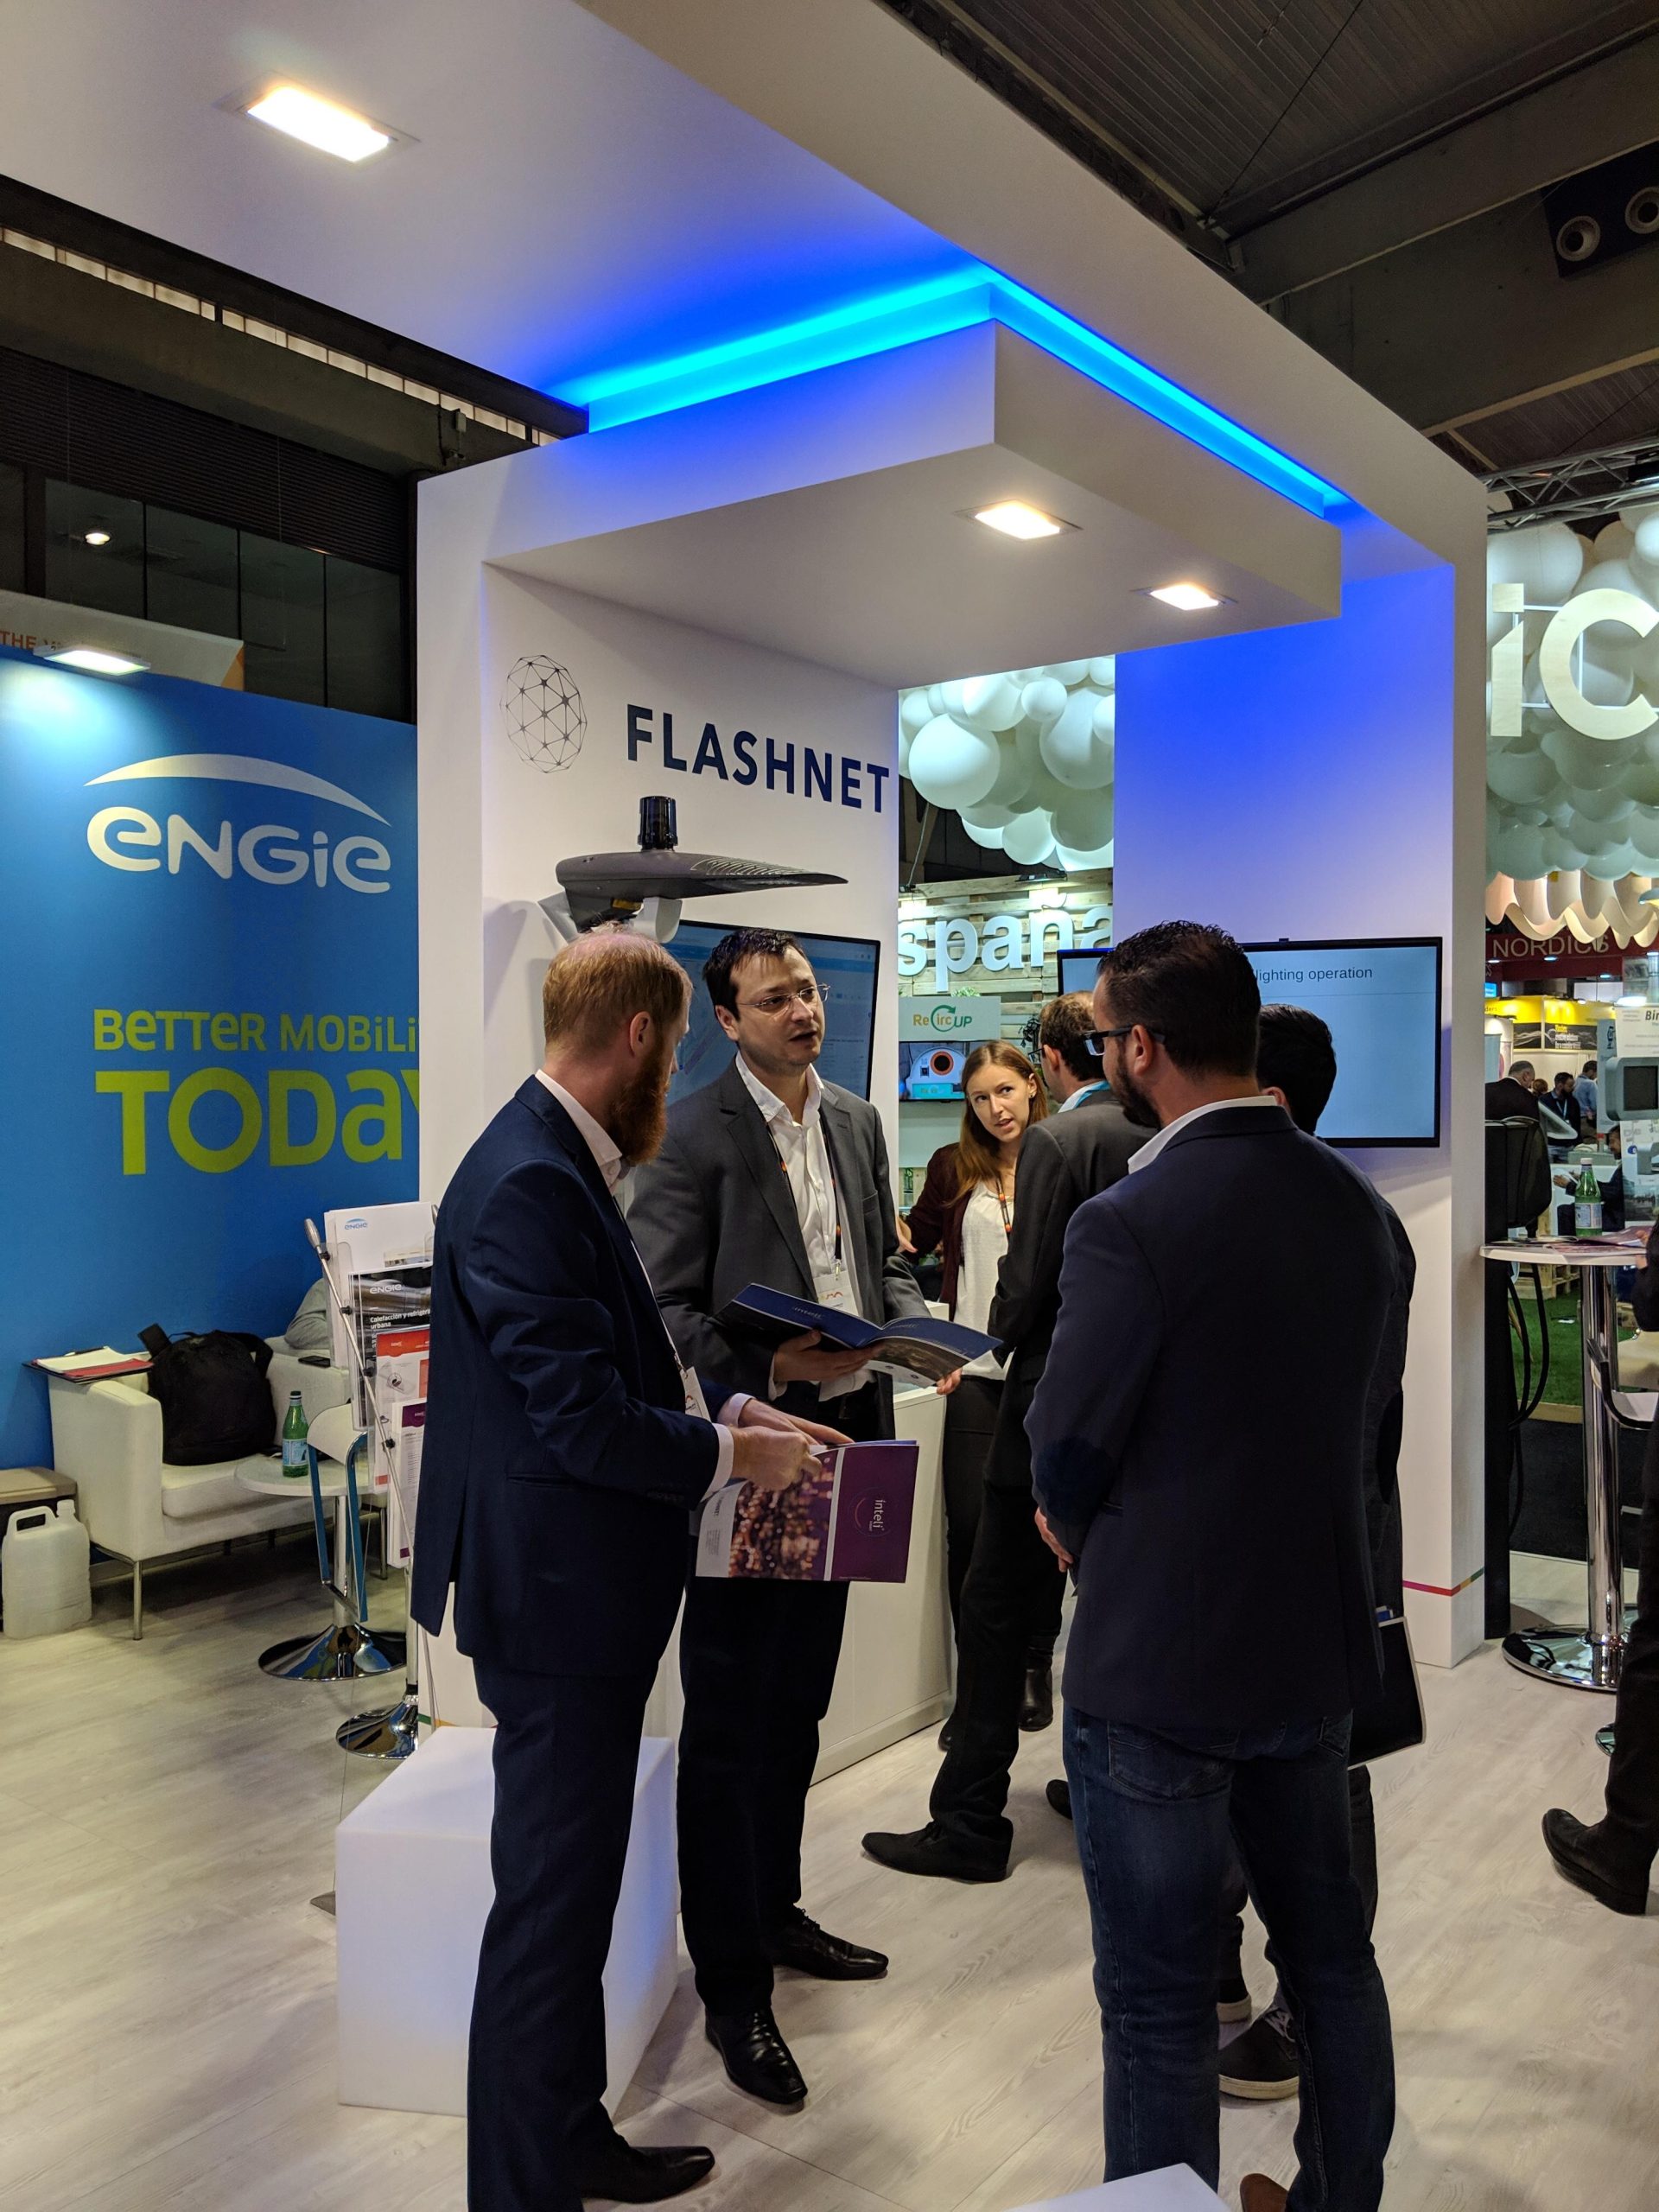 FLASHNET part of ENGIE’s global effort for Inclusive & Sharing Cities